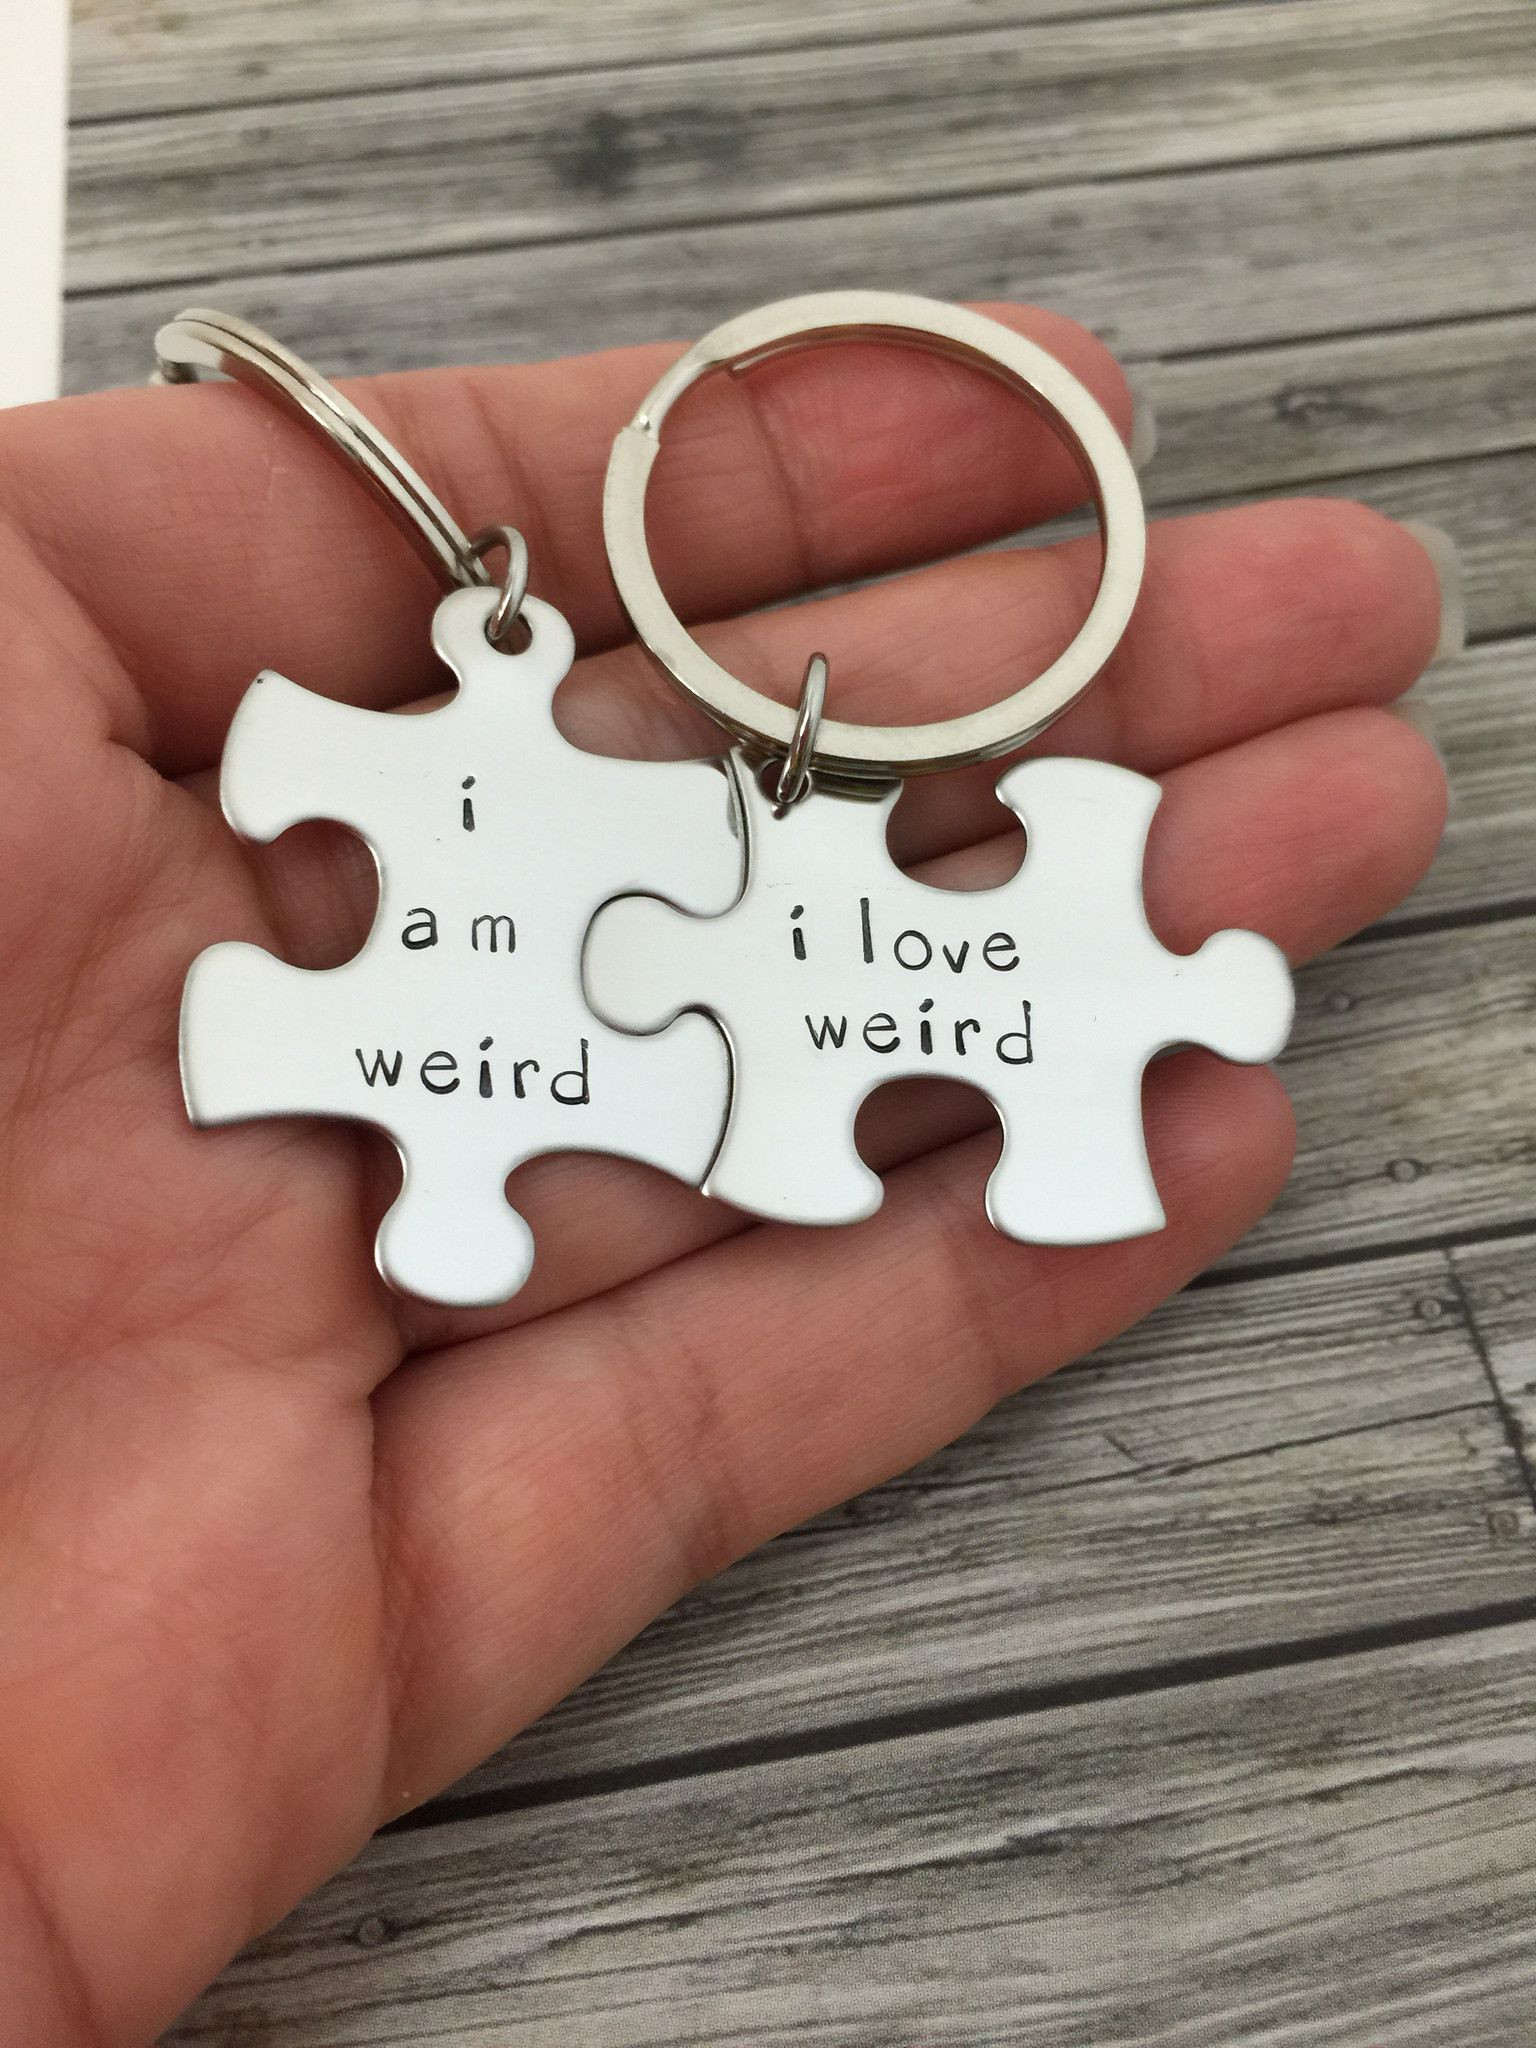 Anniversary Gift Ideas For Couple
 I am weird I love weird Couples Keychains Couples Gift